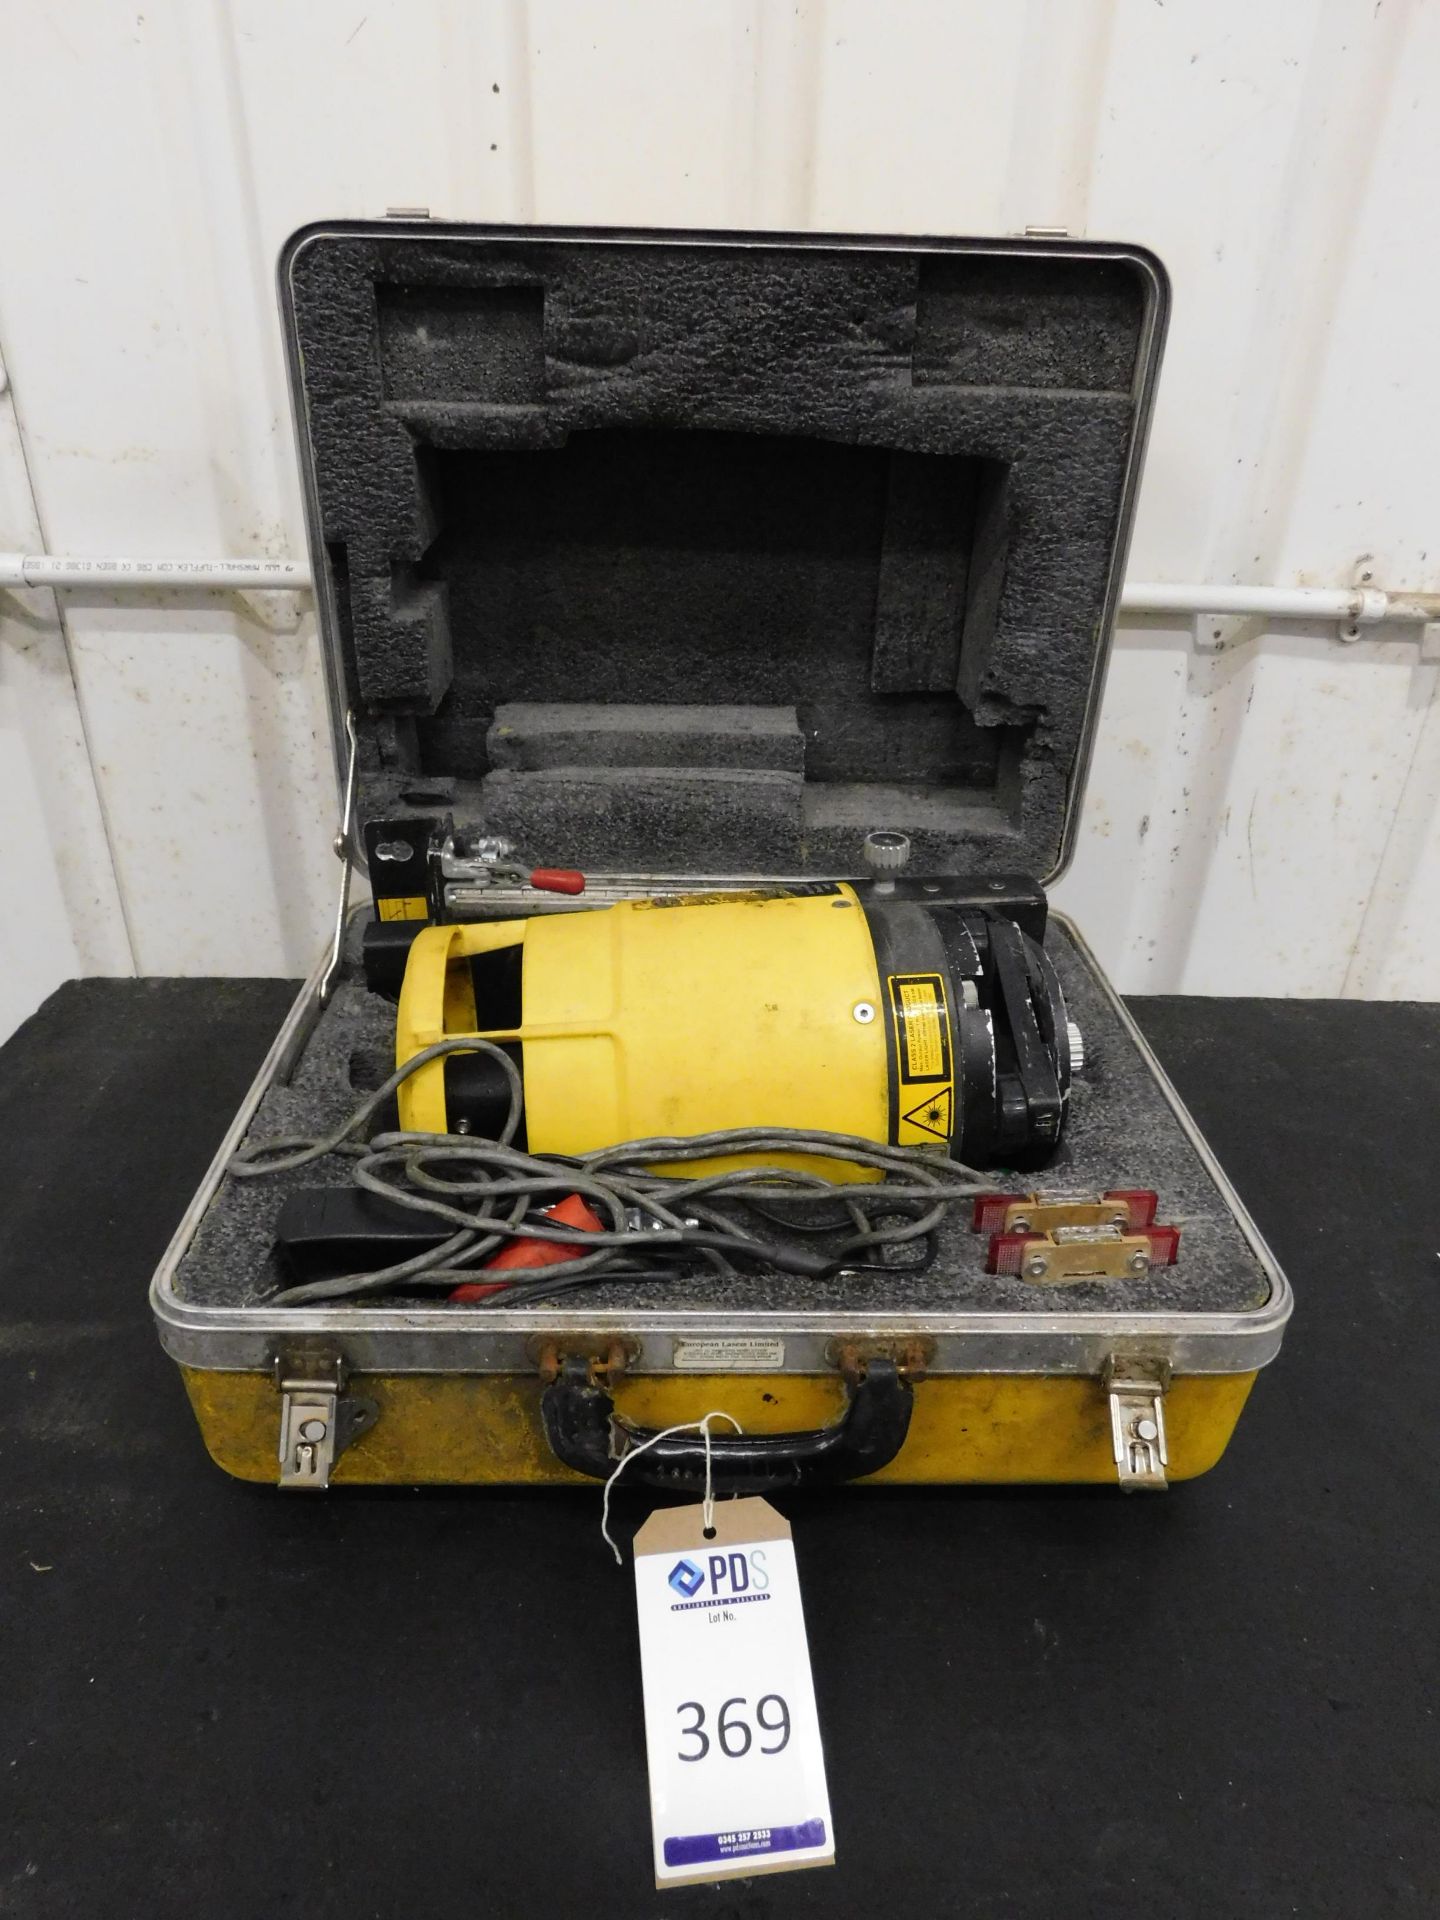 AGL EAGL-2VX, EC0139 Rotary Laser (Location: South East London. Please Refer to General Notes)